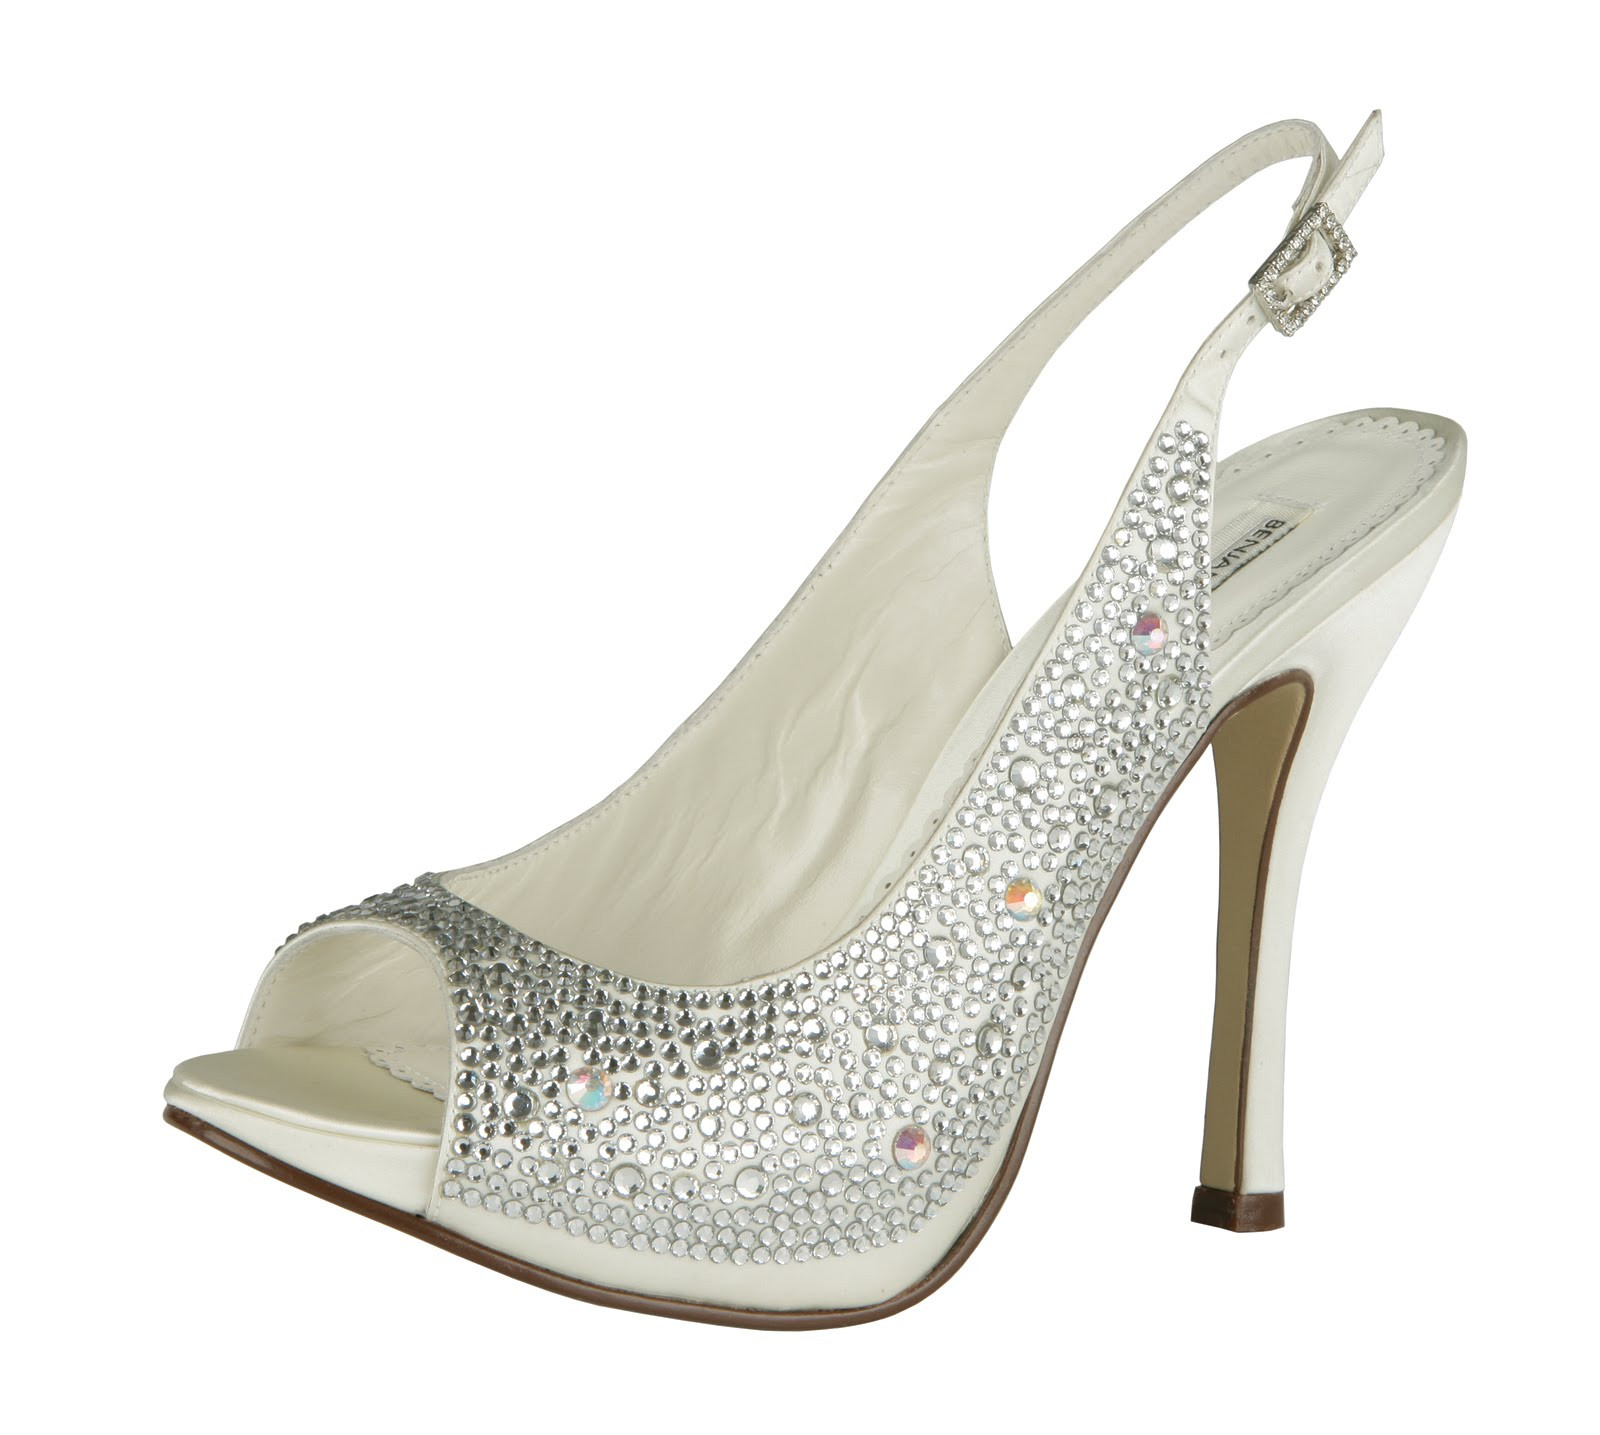 Crystal Heels Wedding Shoes
 Everything But The Dress All Crystal Bridal Shoes by